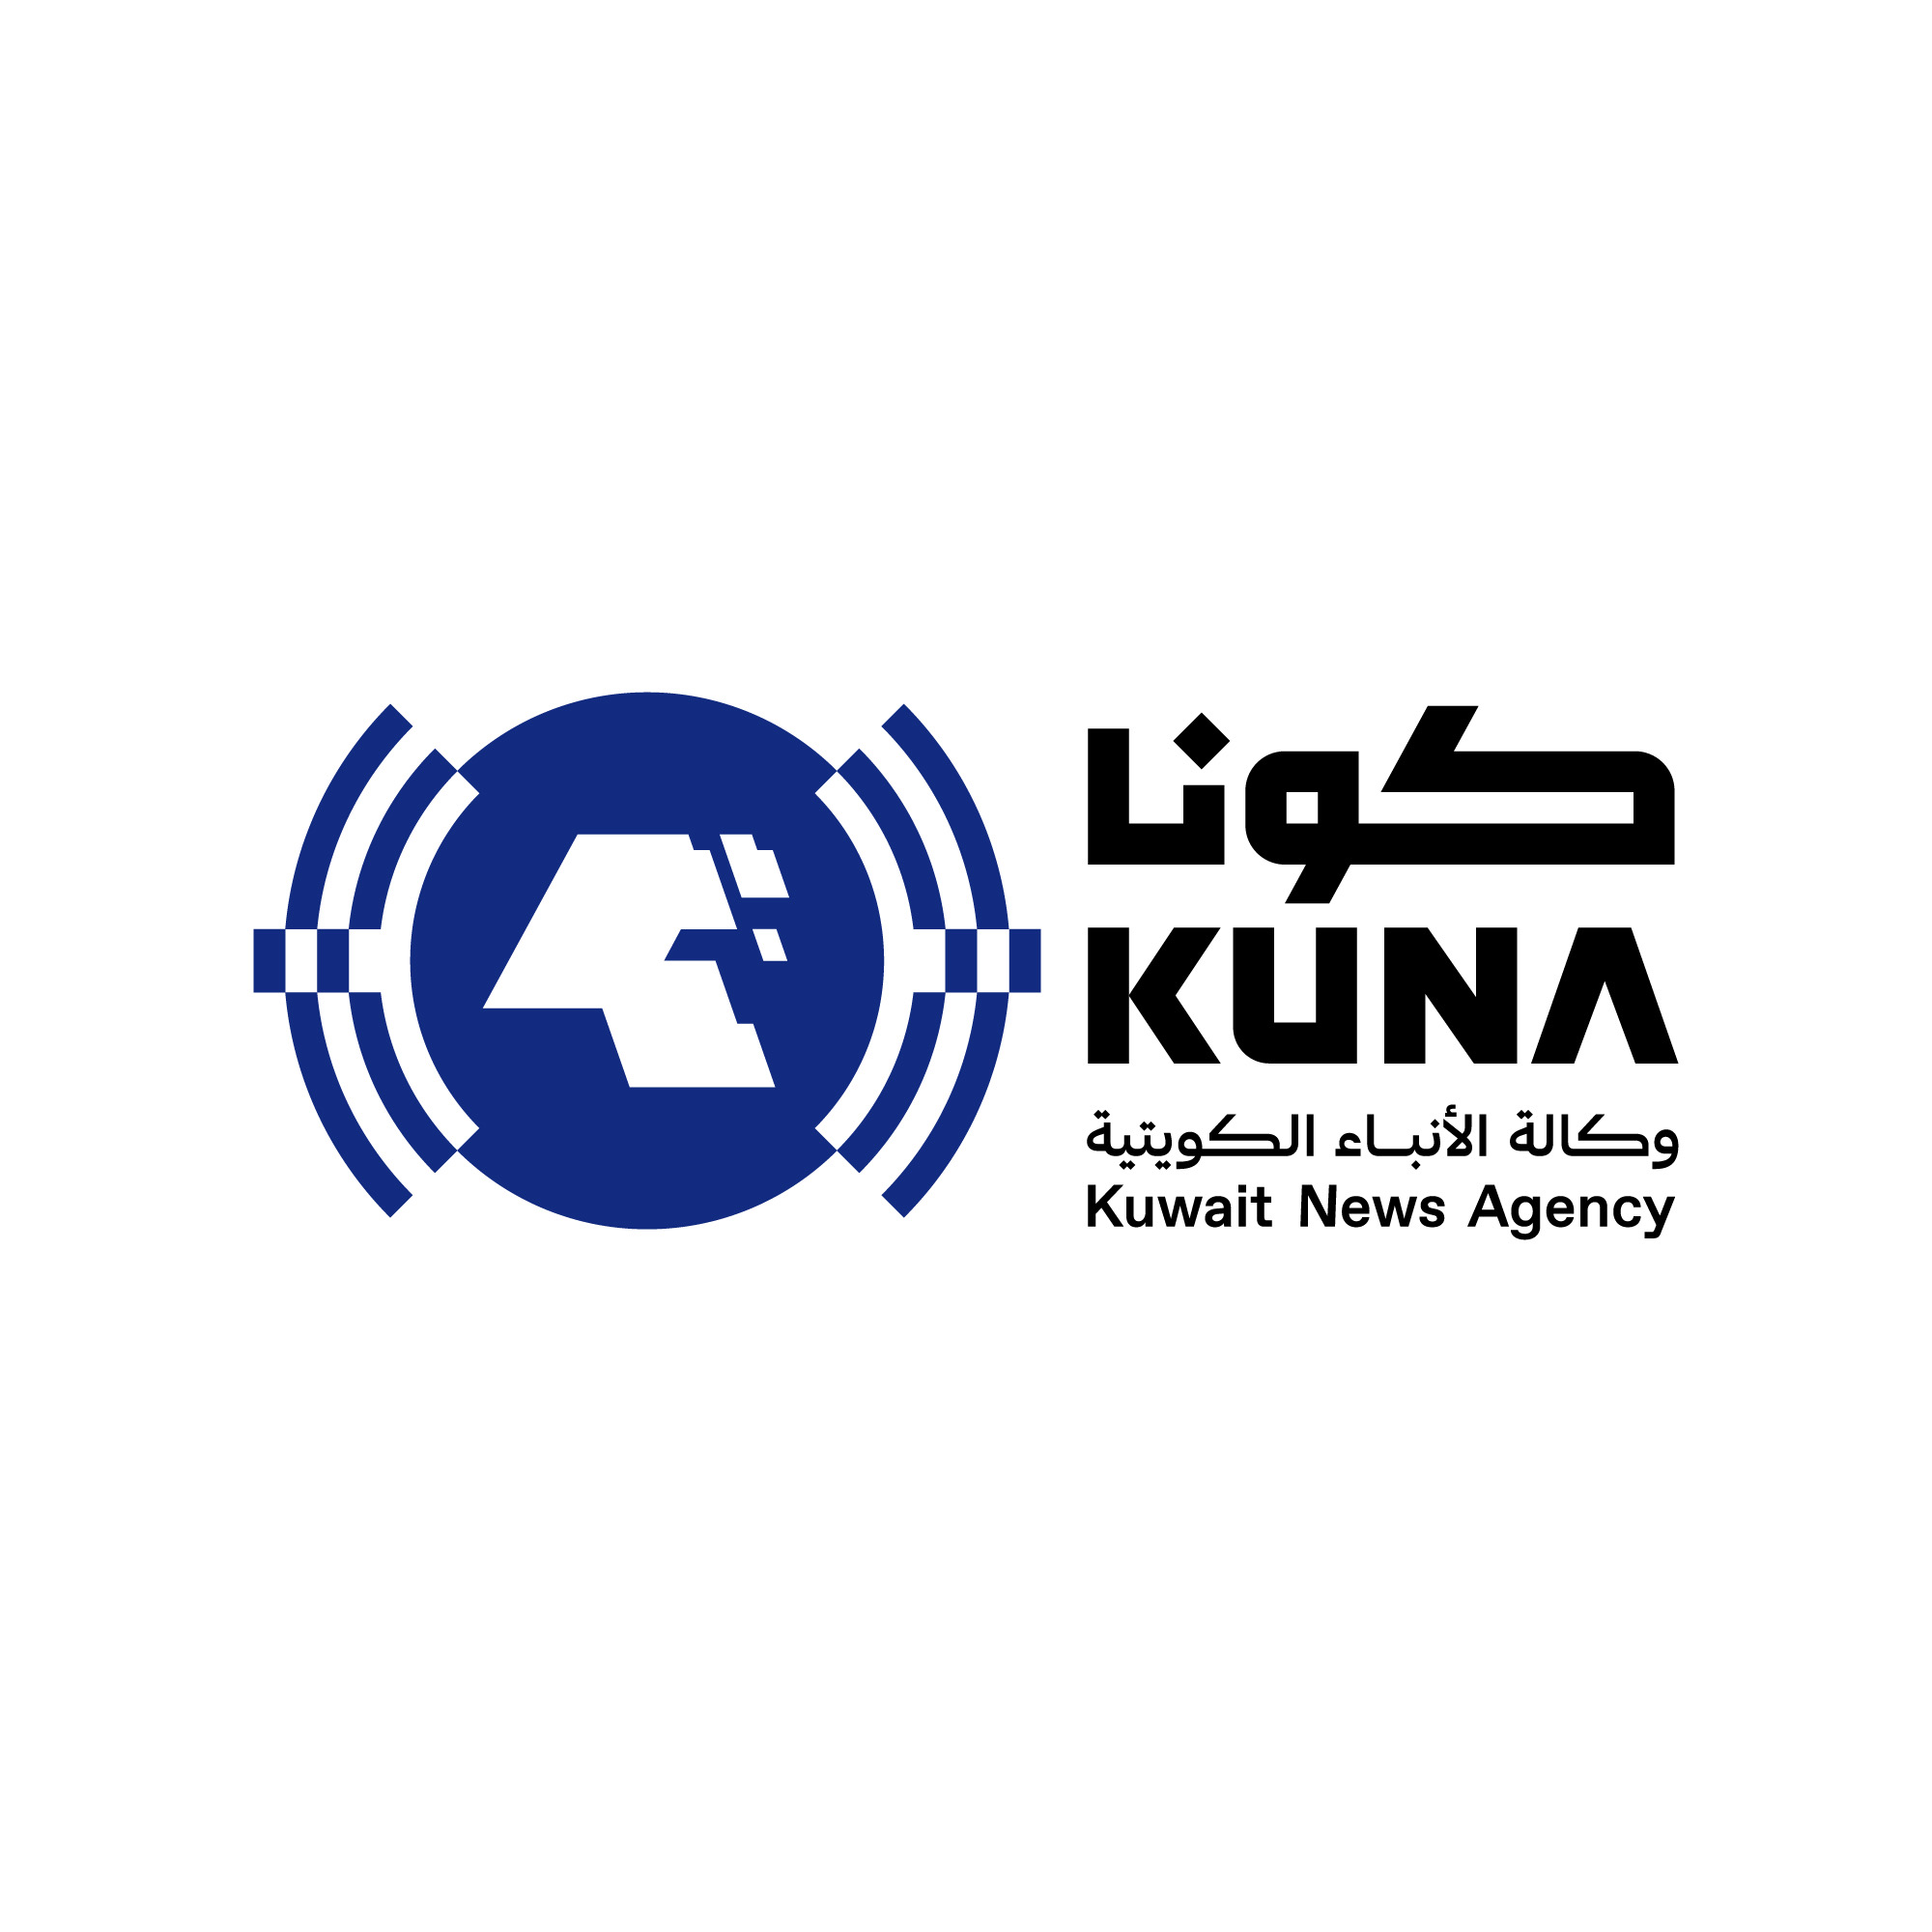 Briefing of KUNA main news for Tuesday until 00:00 GMT